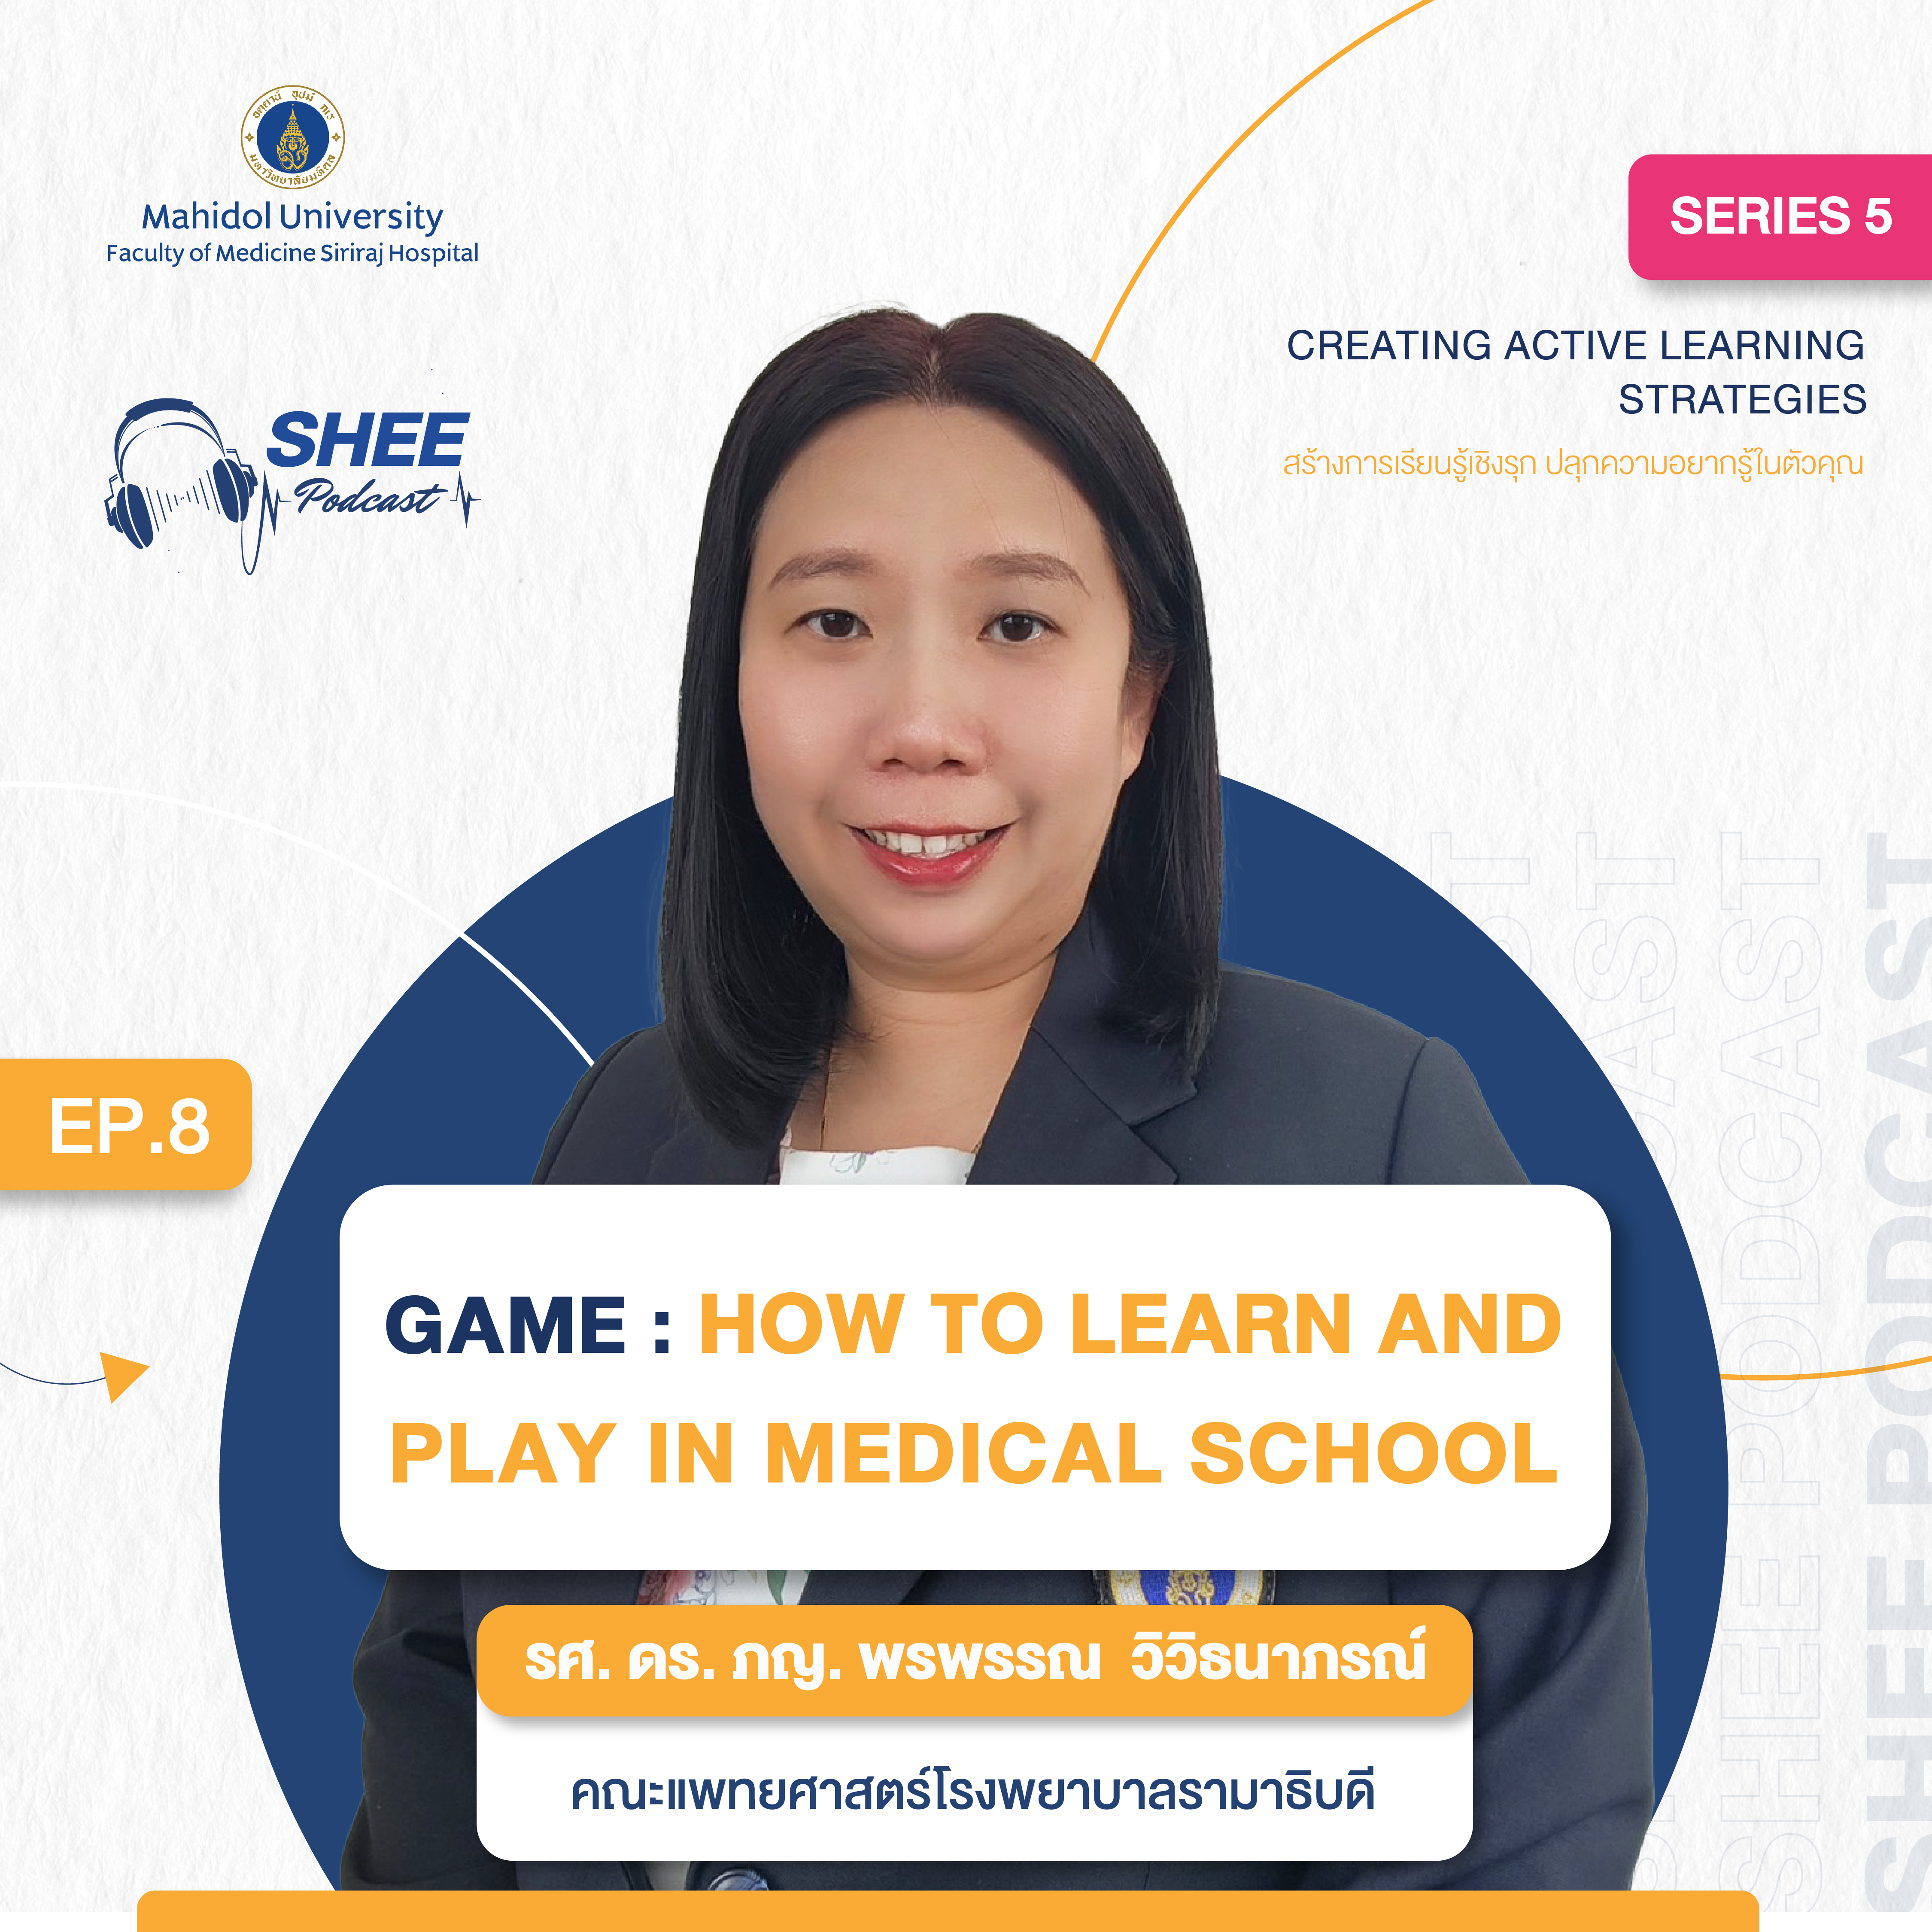 Episode 8 : Game : How to learn and play in medical school